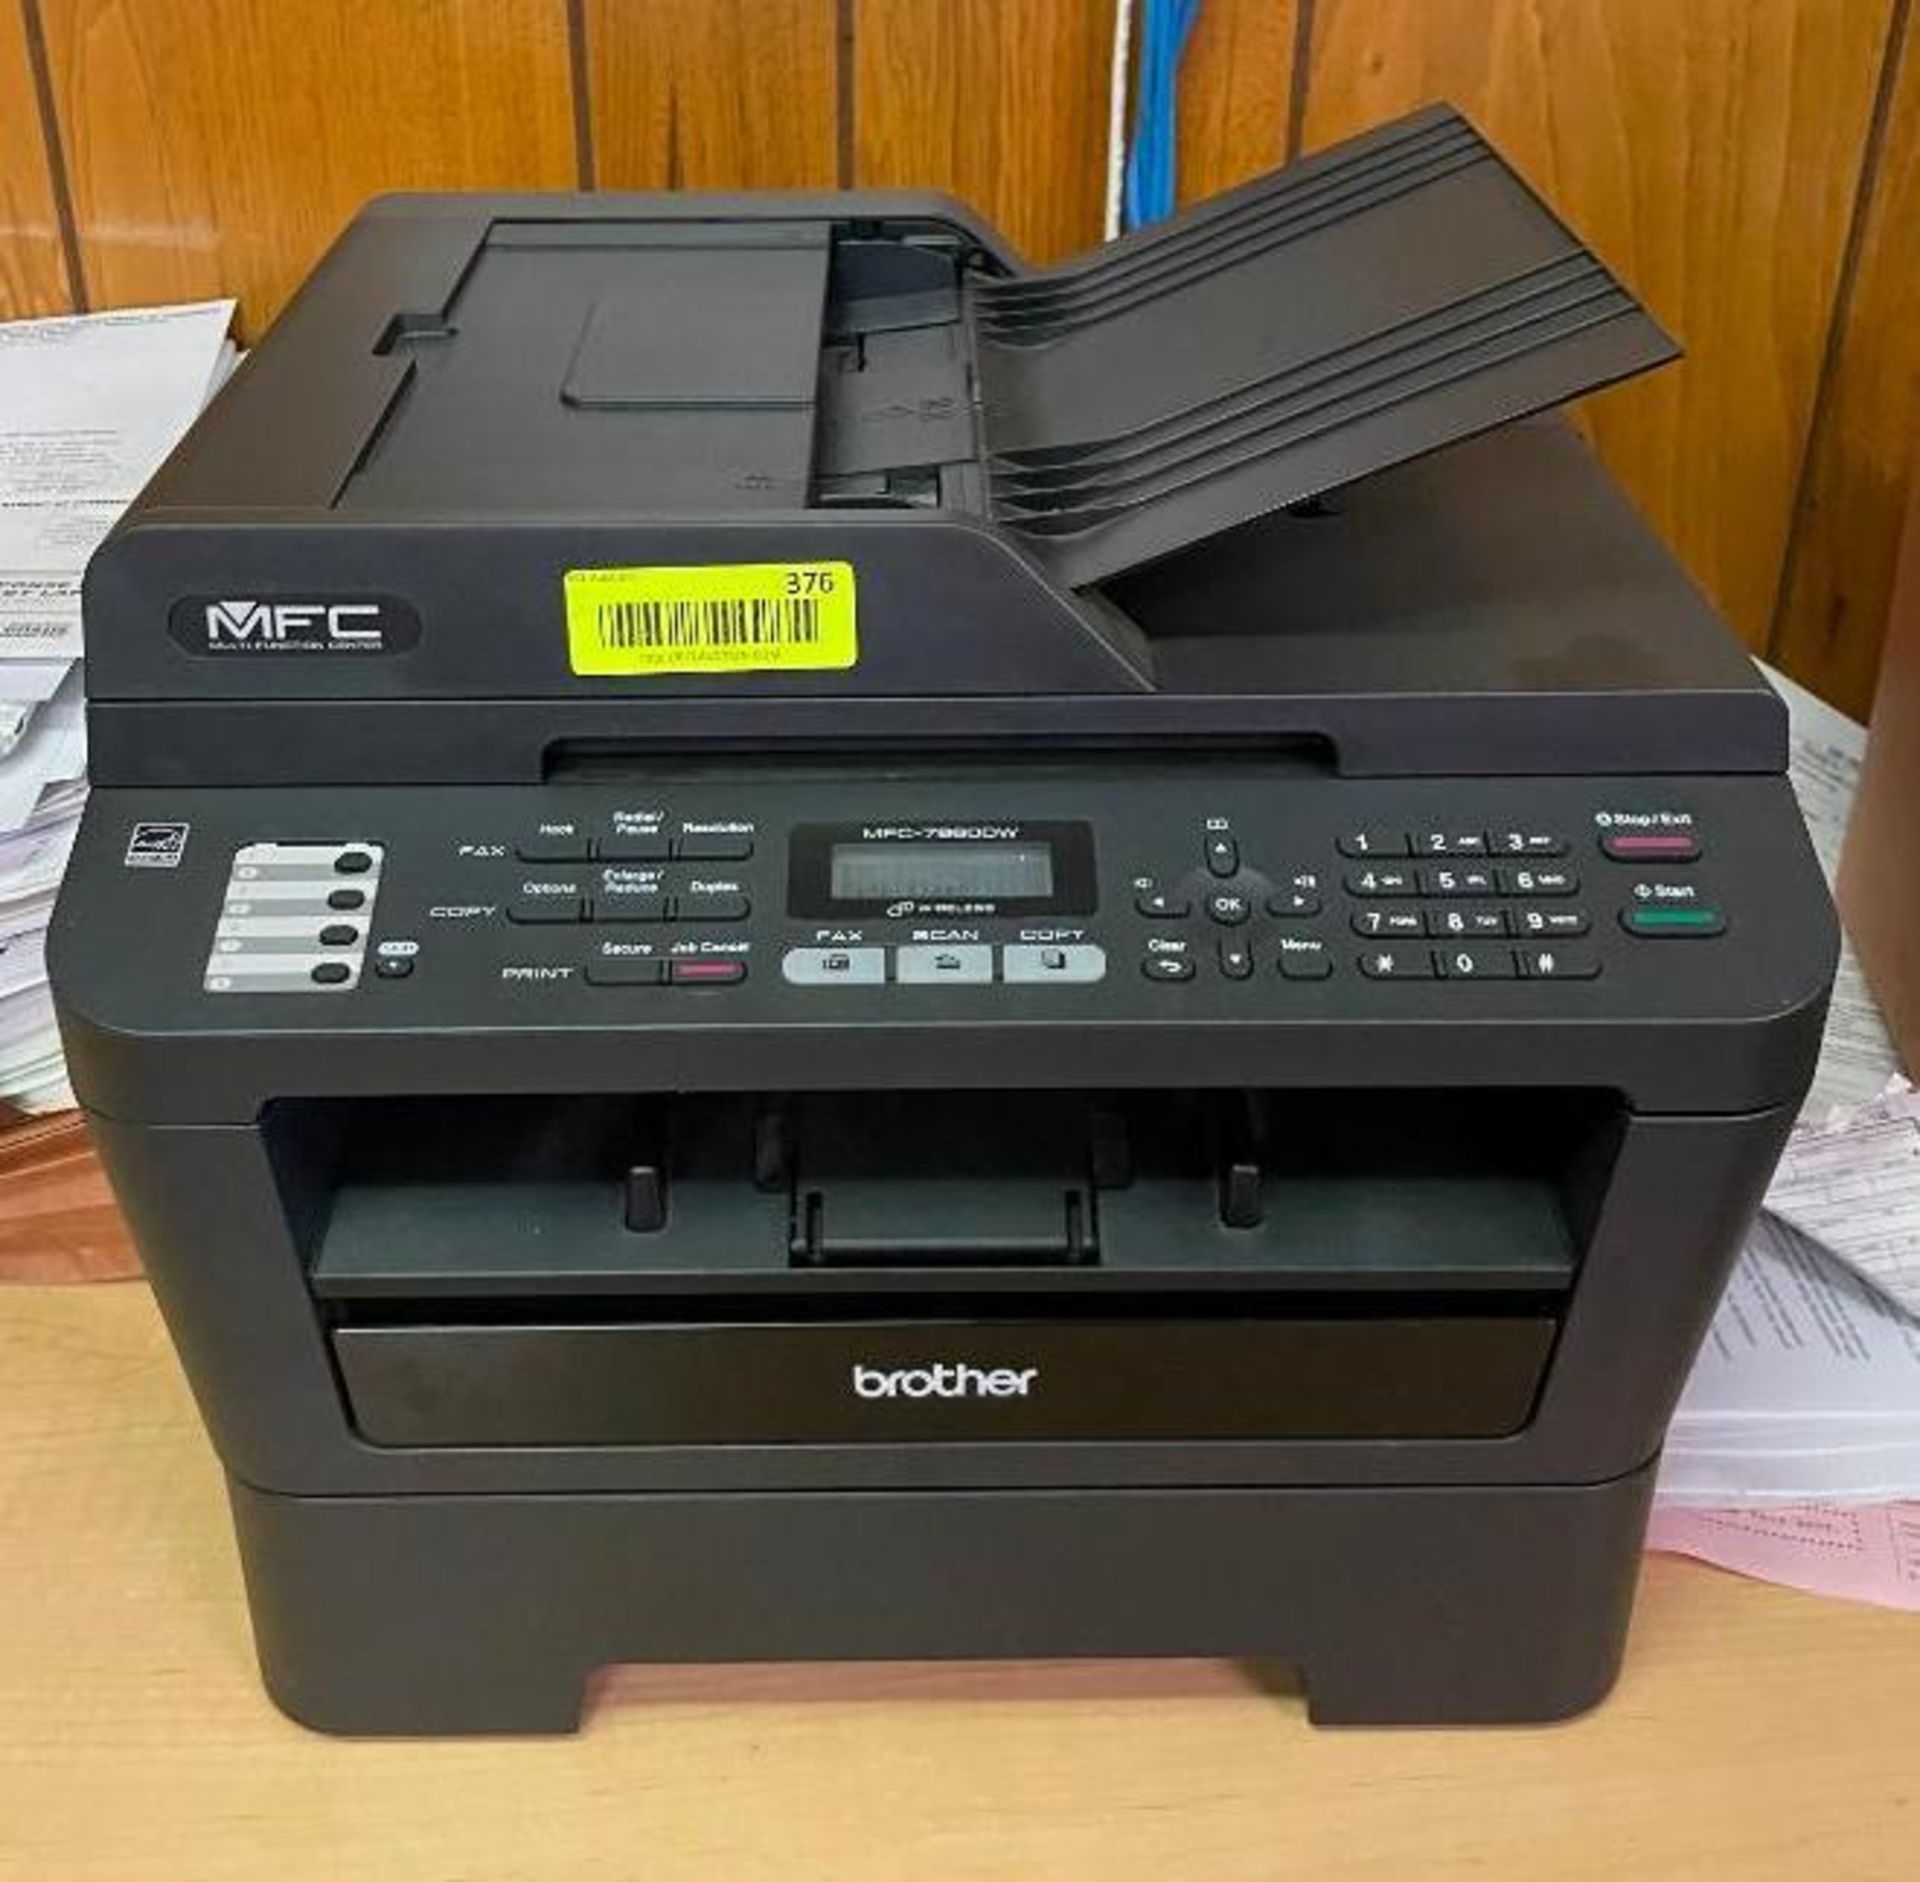 BROTHER MFC-7860DW PRINTER LOCATION: OFFICE QTY: 1